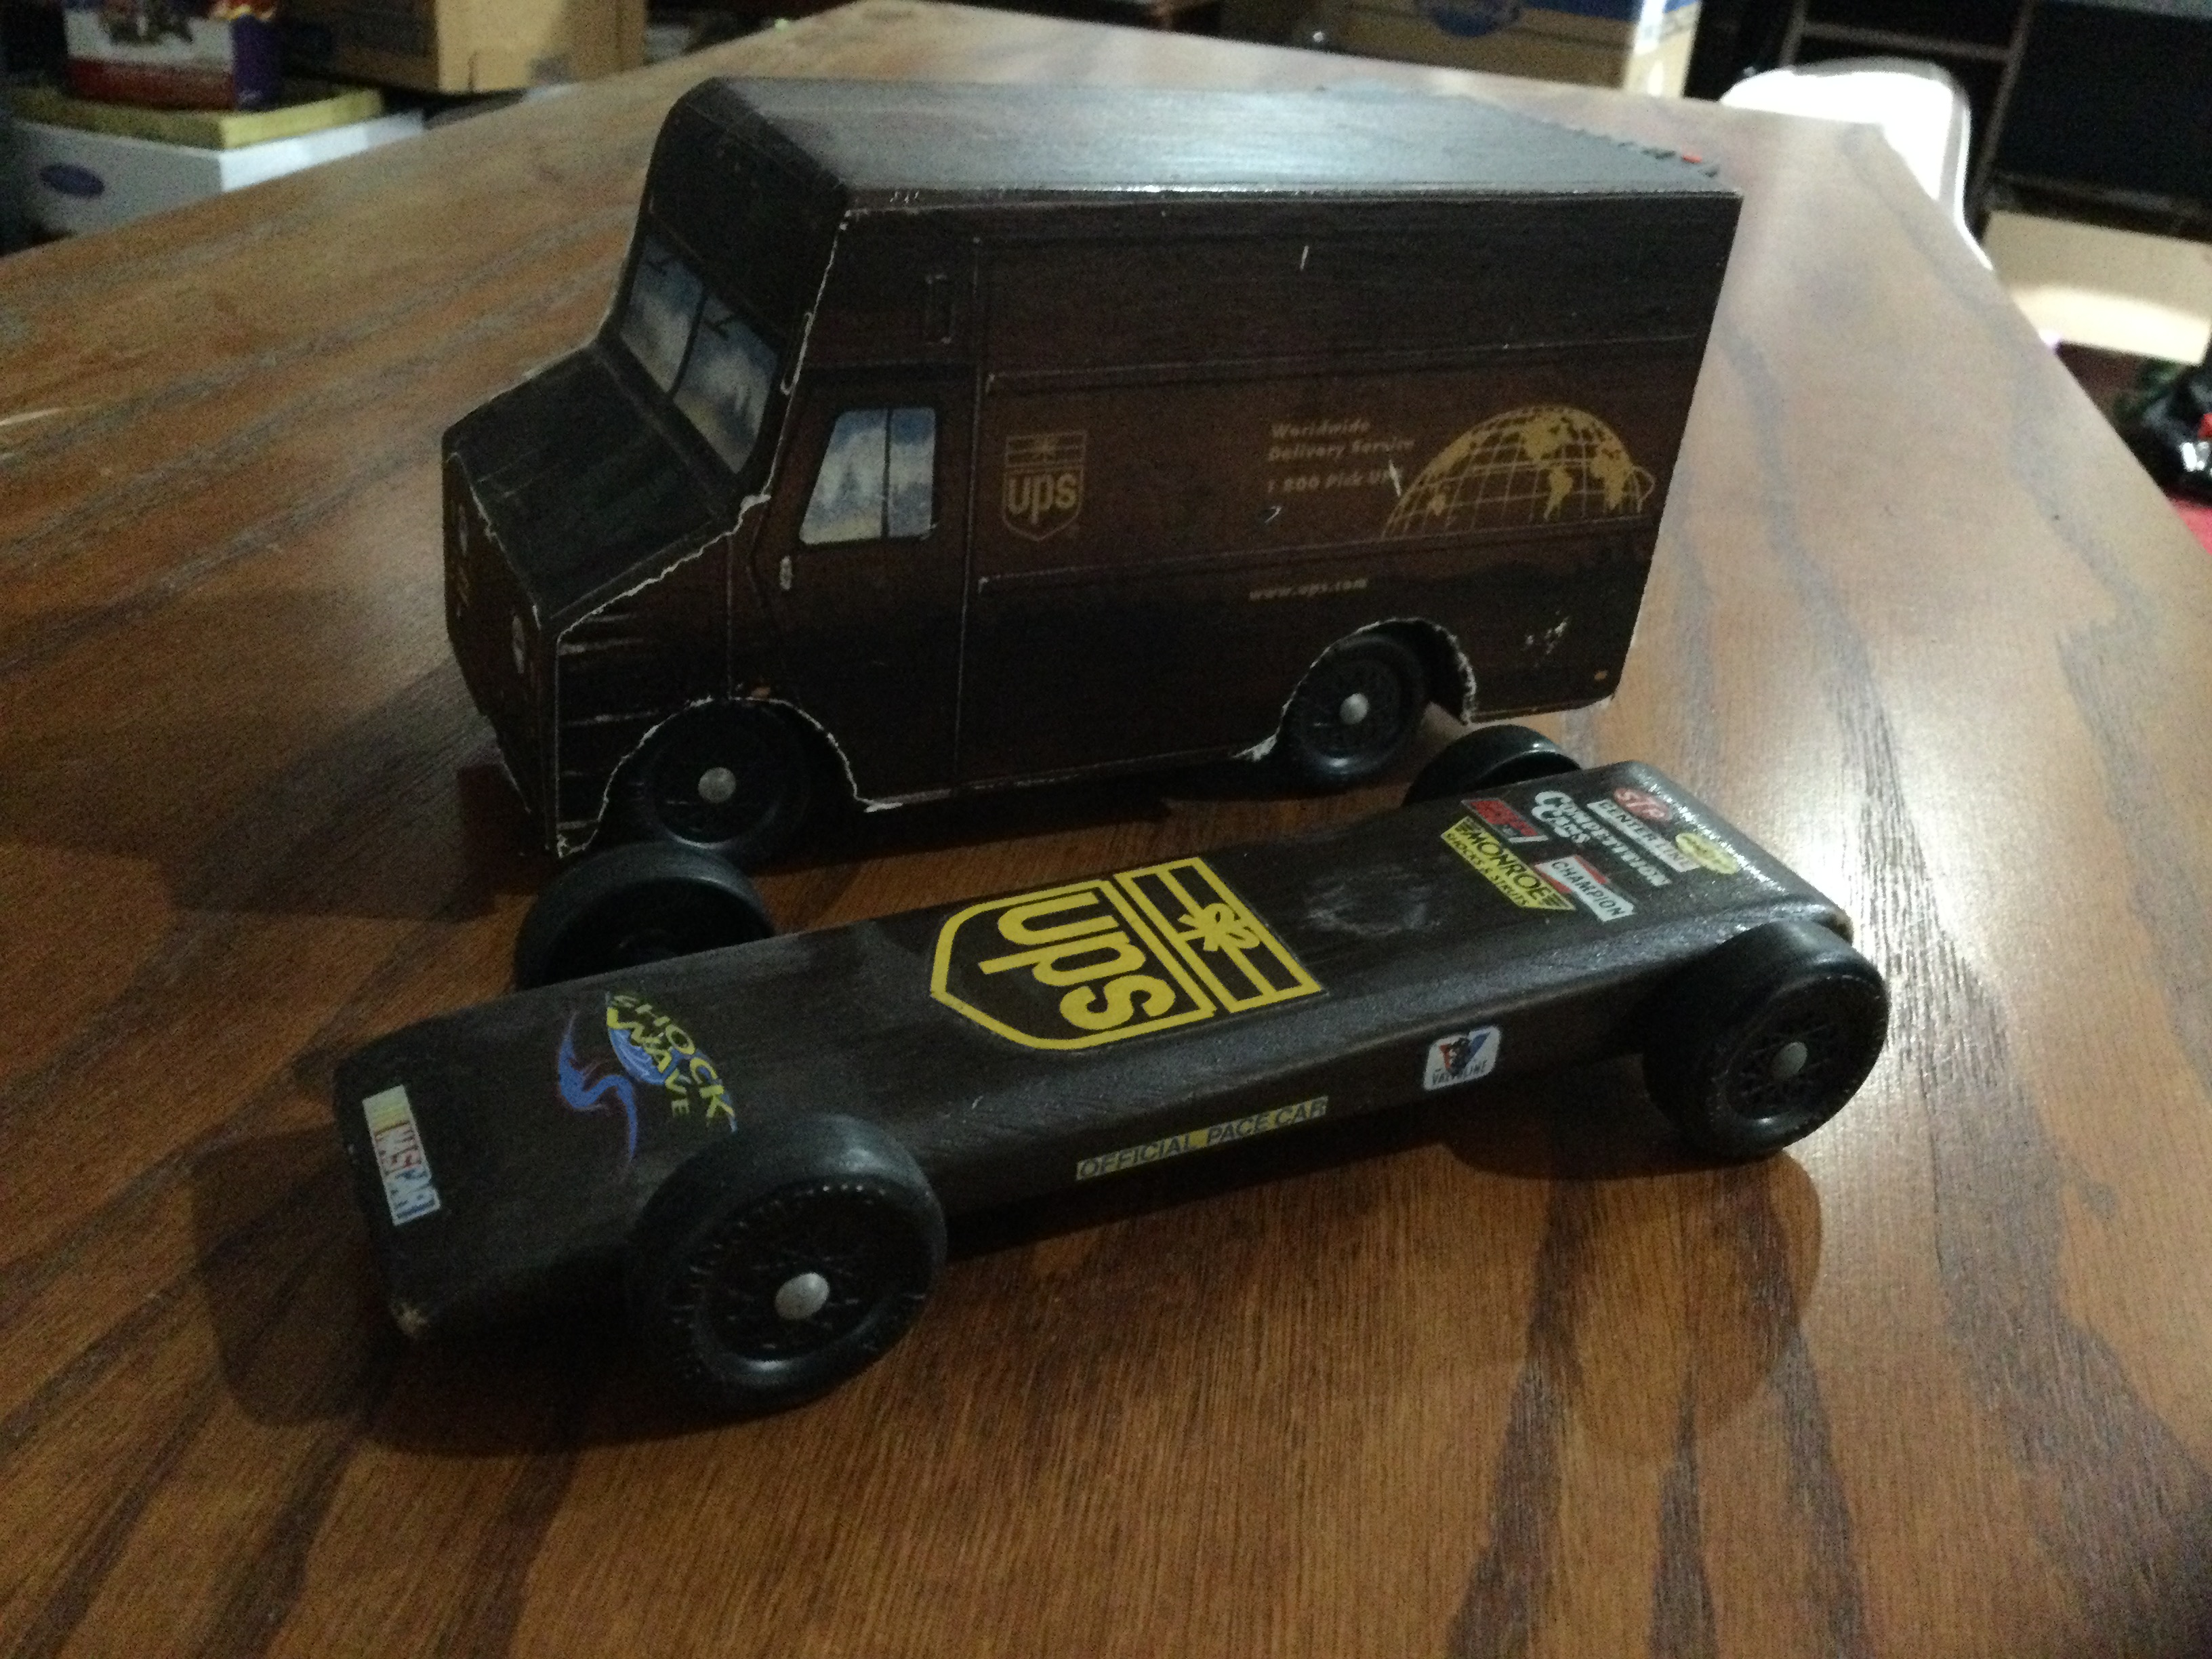 The UPS package car